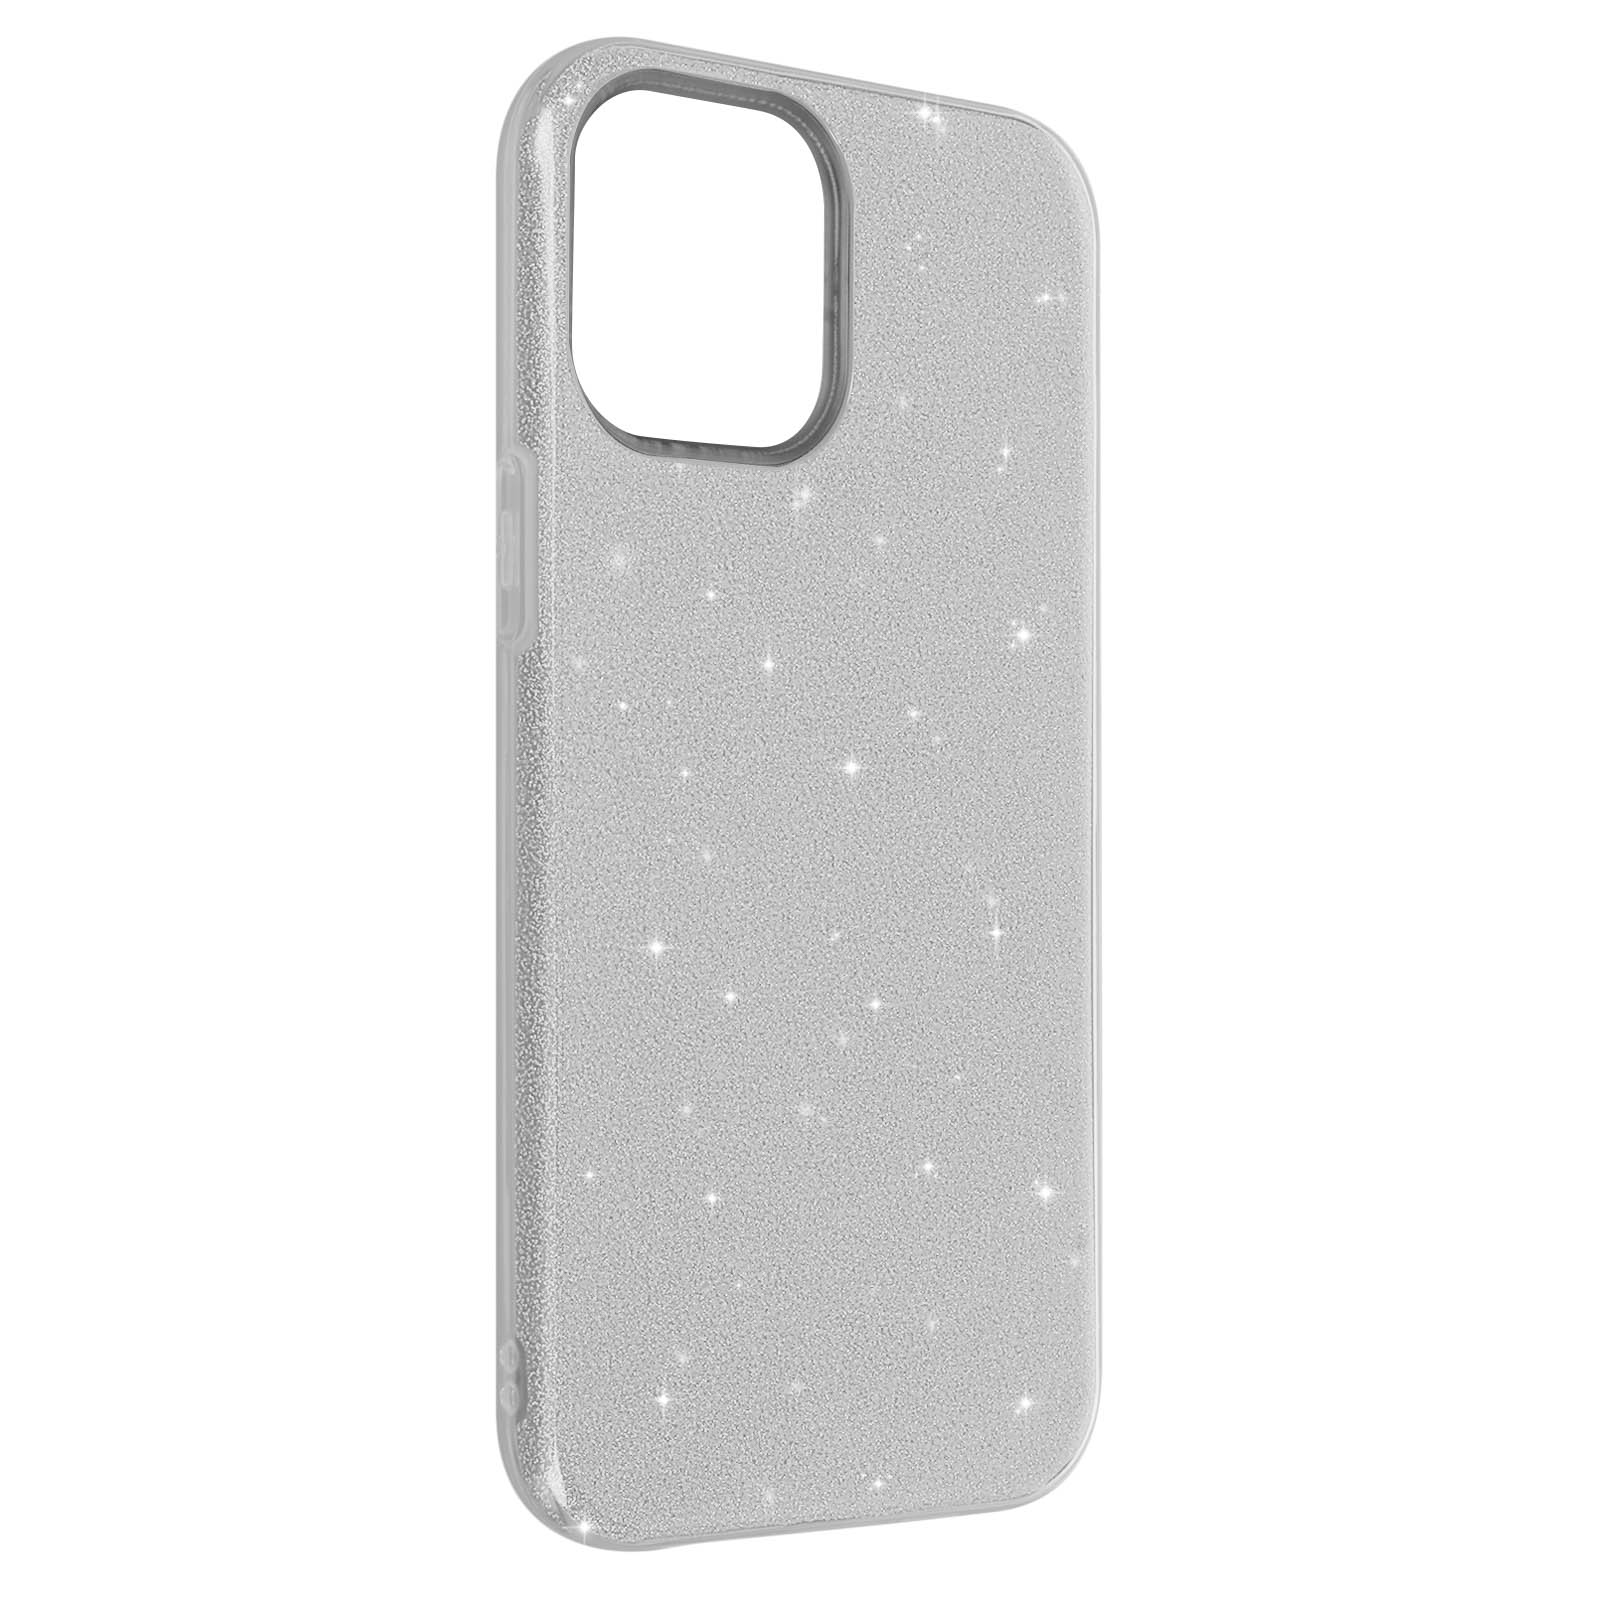 Apple, AVIZAR Max, Pro iPhone Papay Silber Backcover, 12 Series,